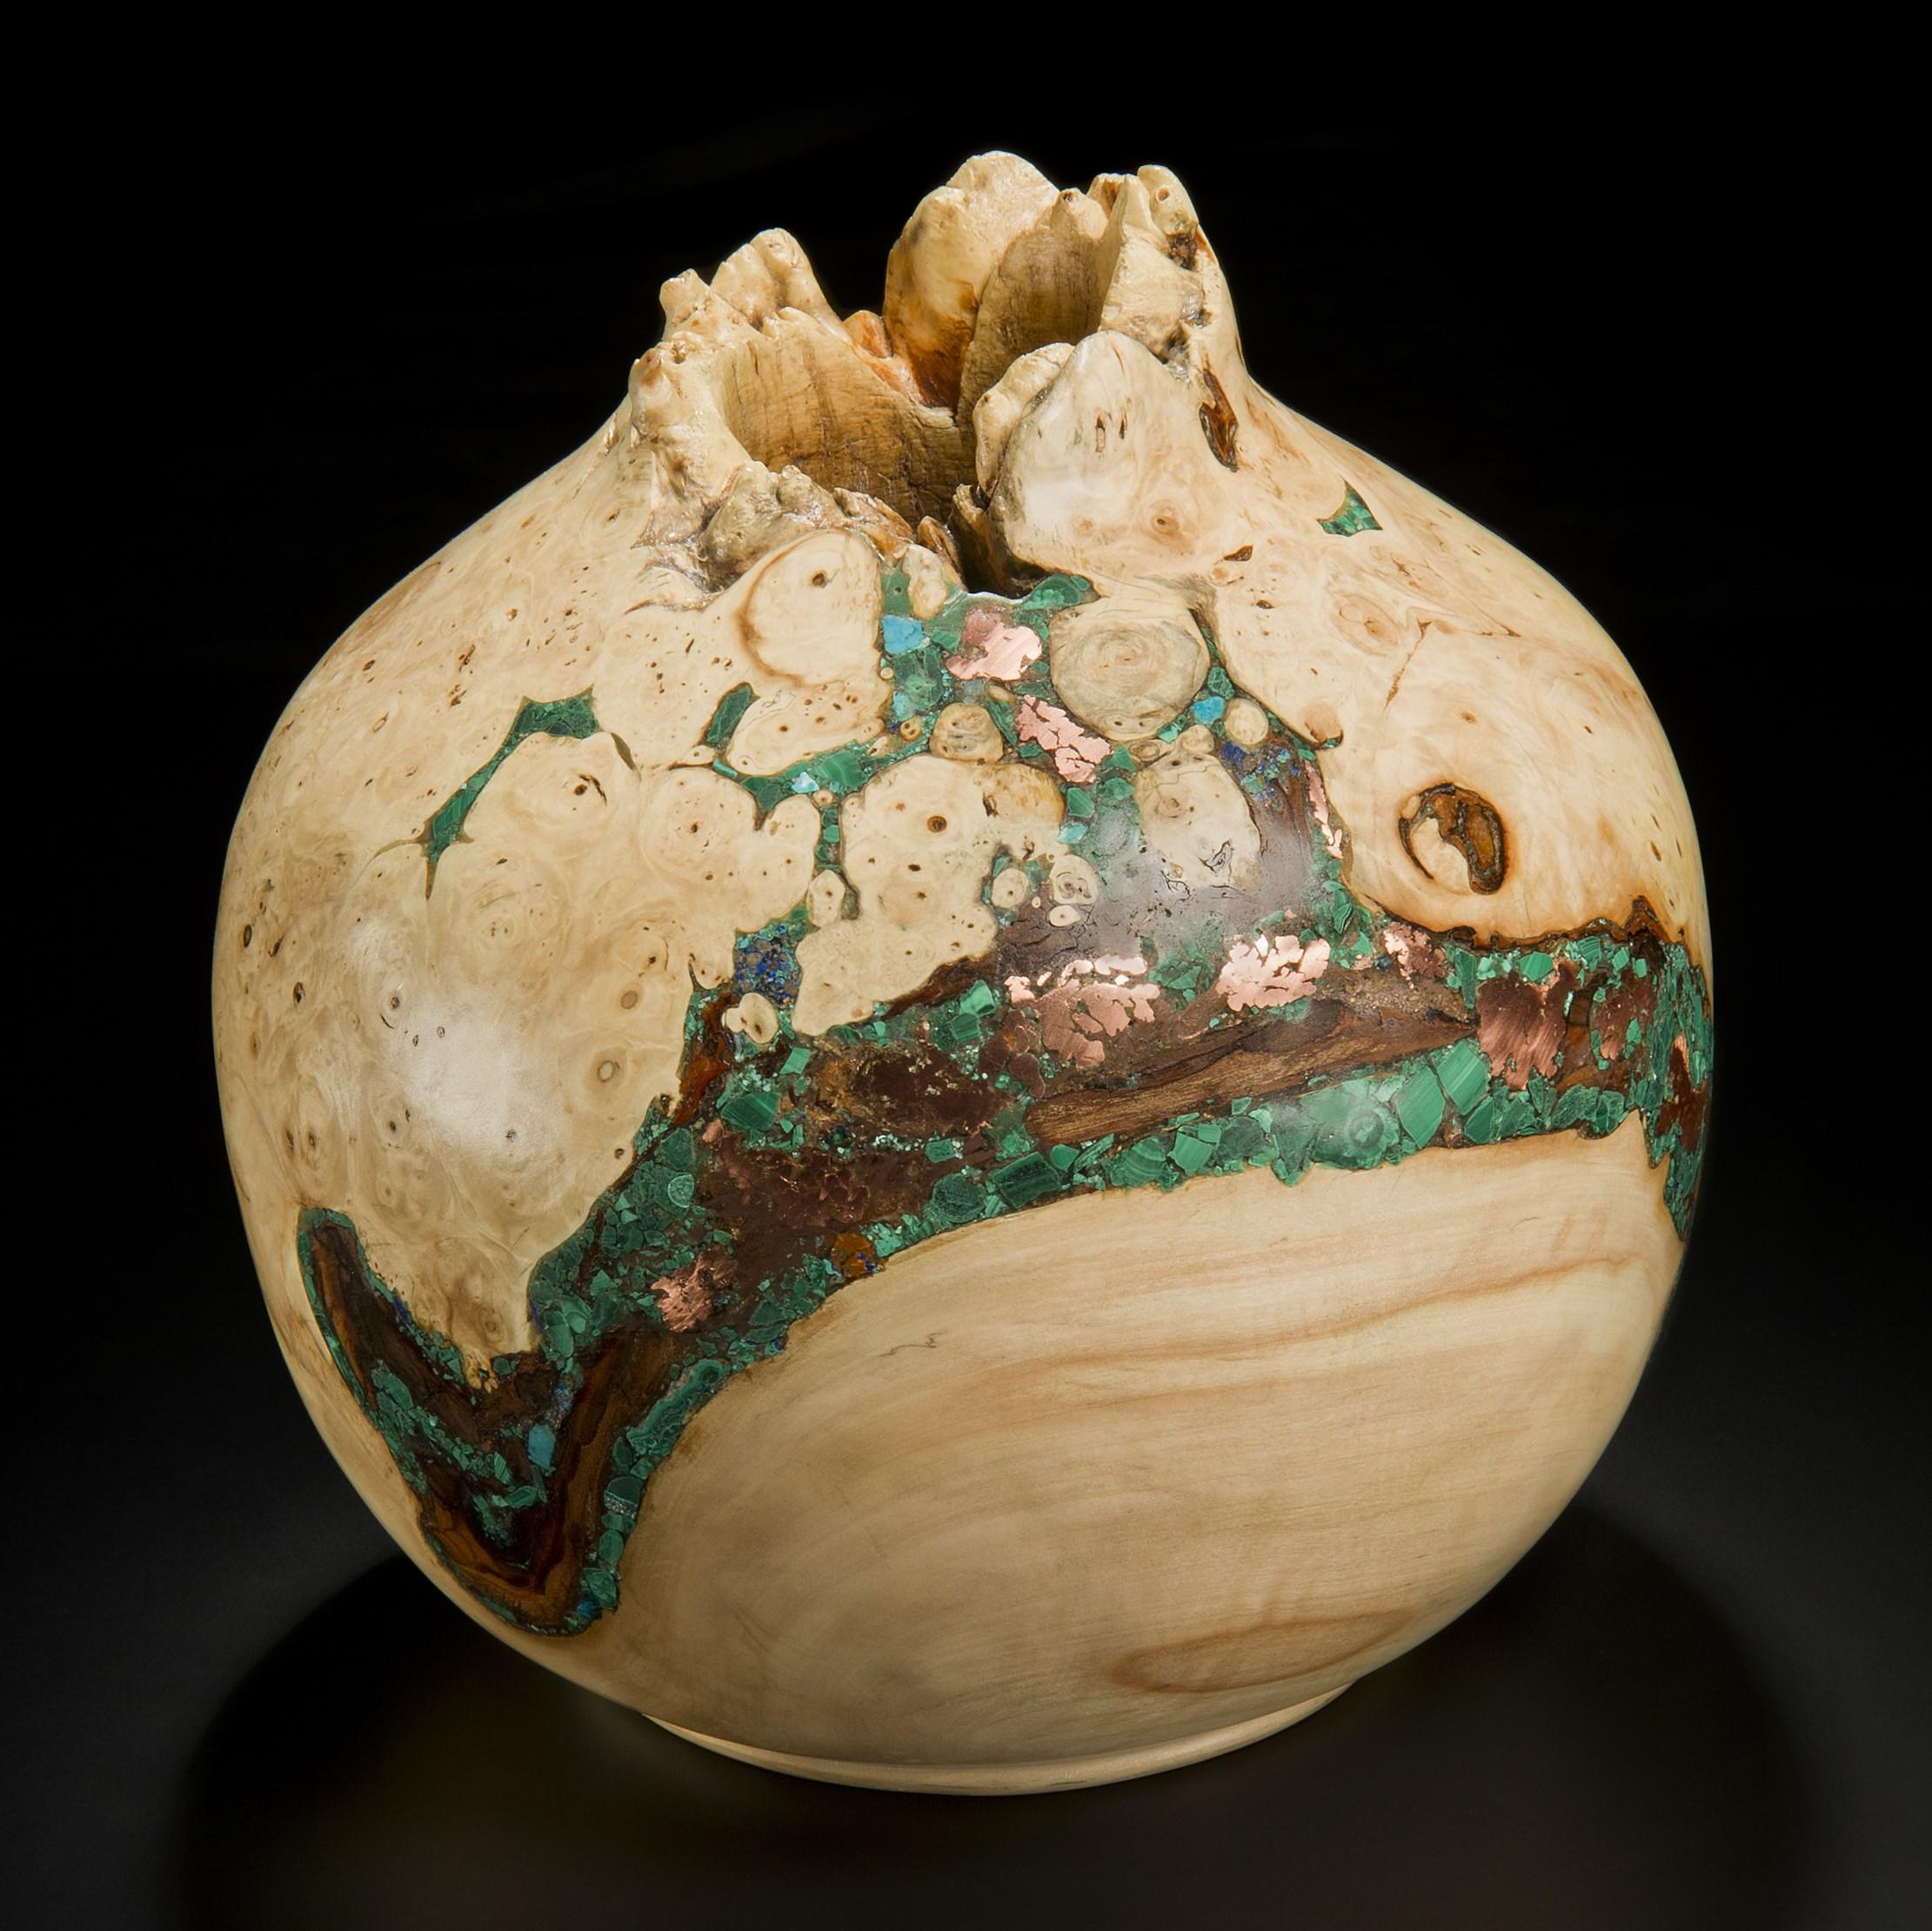 ‘Earthly Treasures No 23’ is a unique sculptural bowl by the British artist, Morrison Thomas. It is made from burred Horse Chestnut inlaid with Native Copper, Malachite & Chrysocolla.

Morrison turns beautiful wooden spheres from damaged or